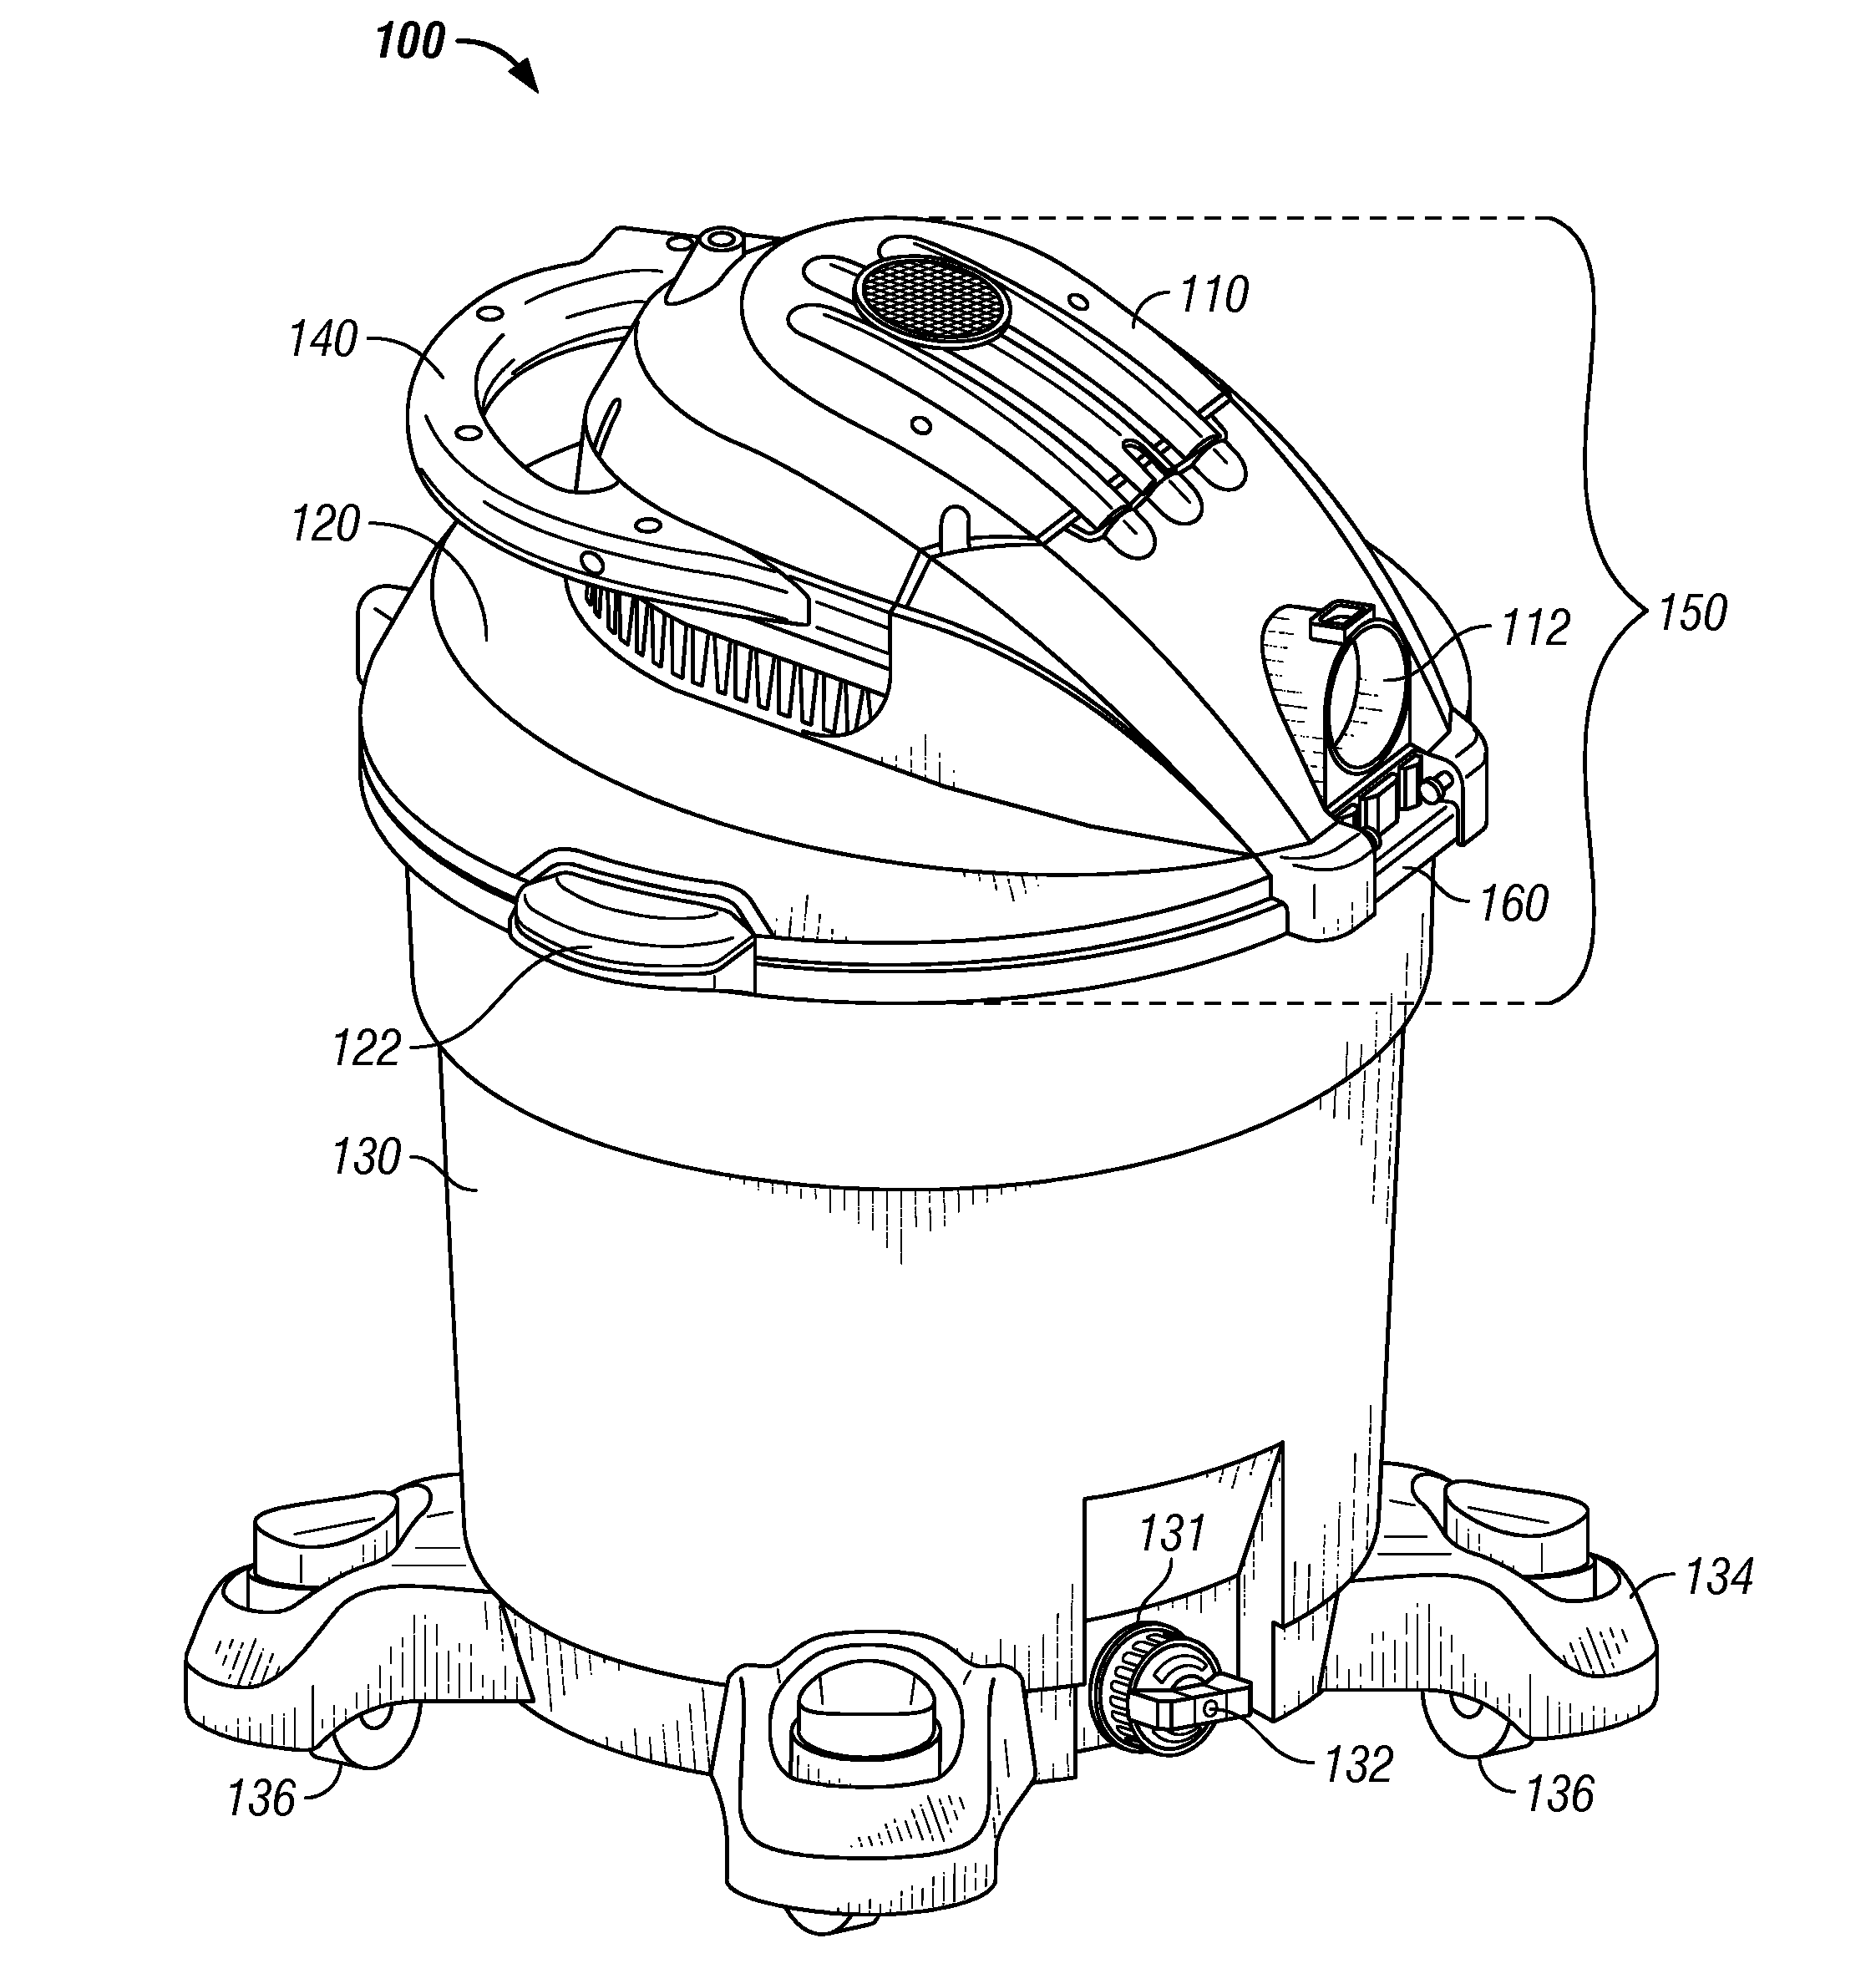 Easy access filter assembly for a wet/dry vacuum appliance